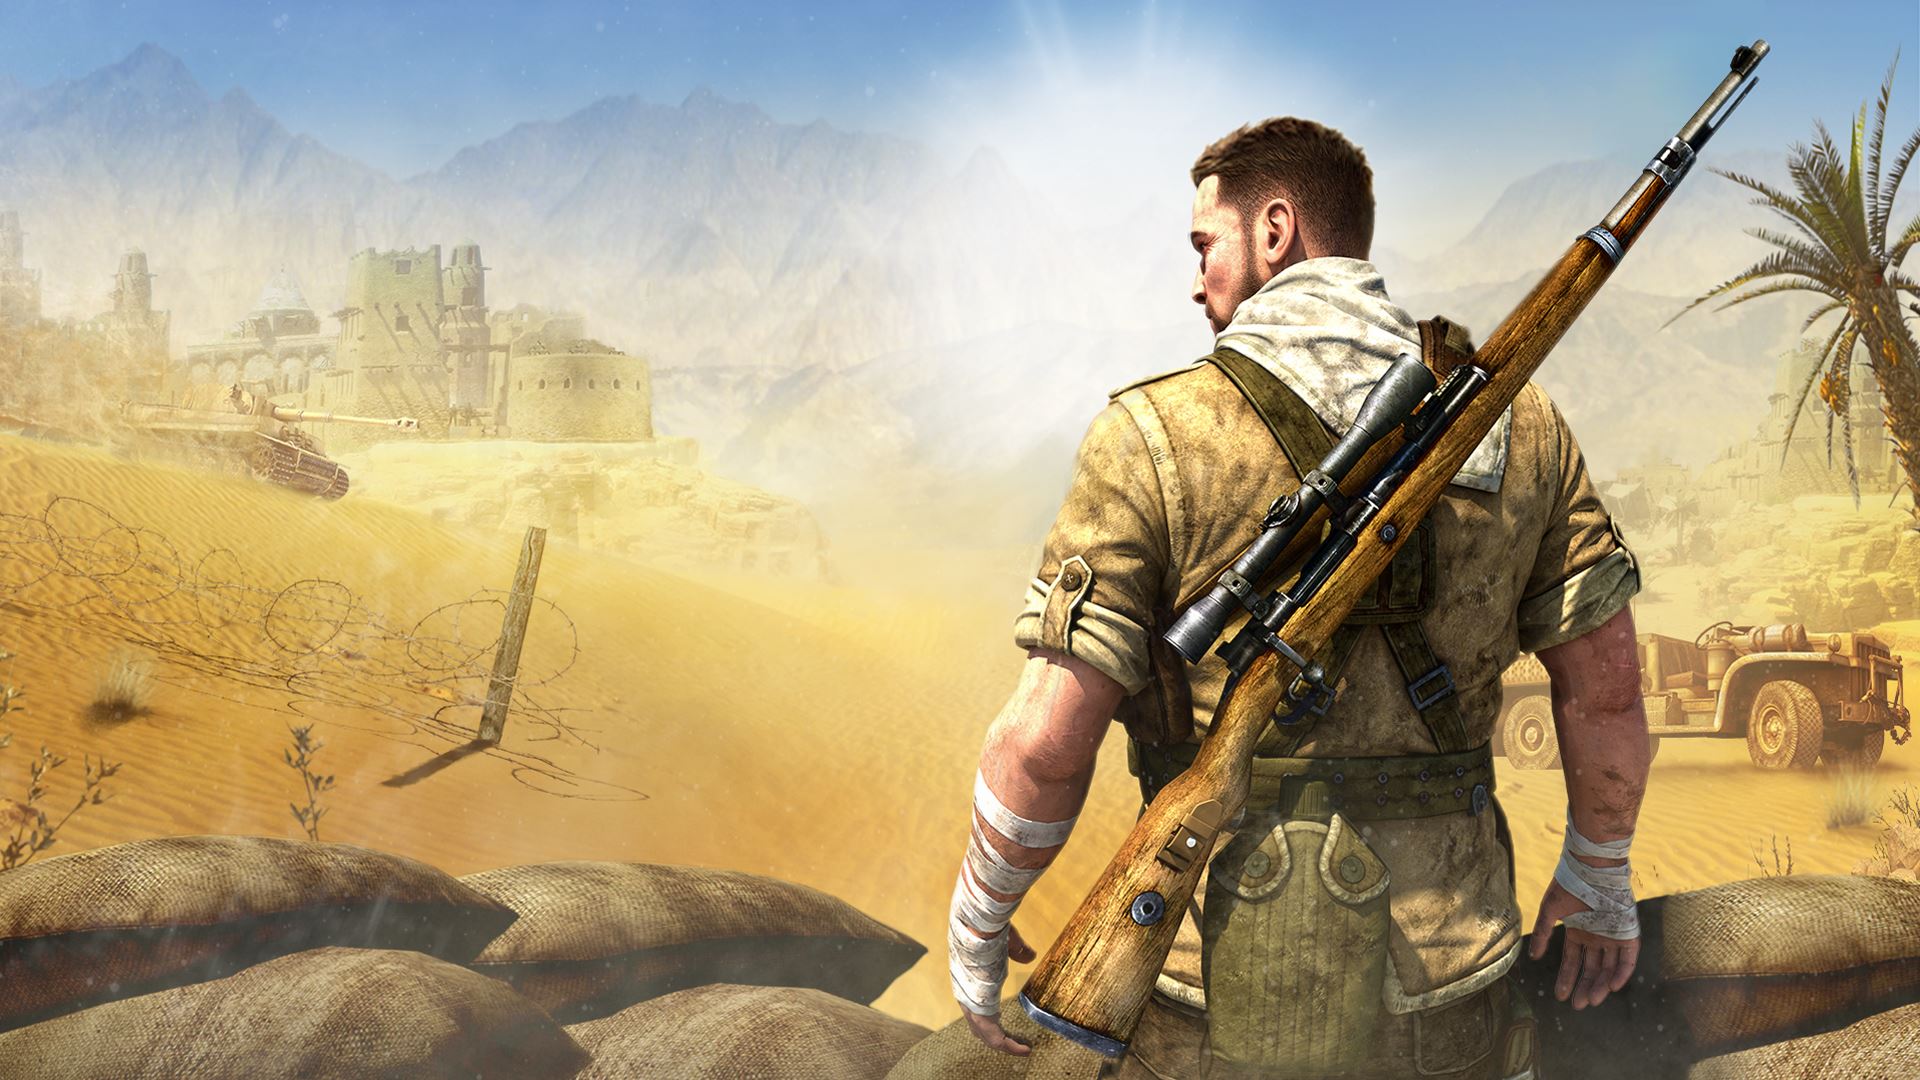 Amazing Sniper Elite 3 Pictures & Backgrounds